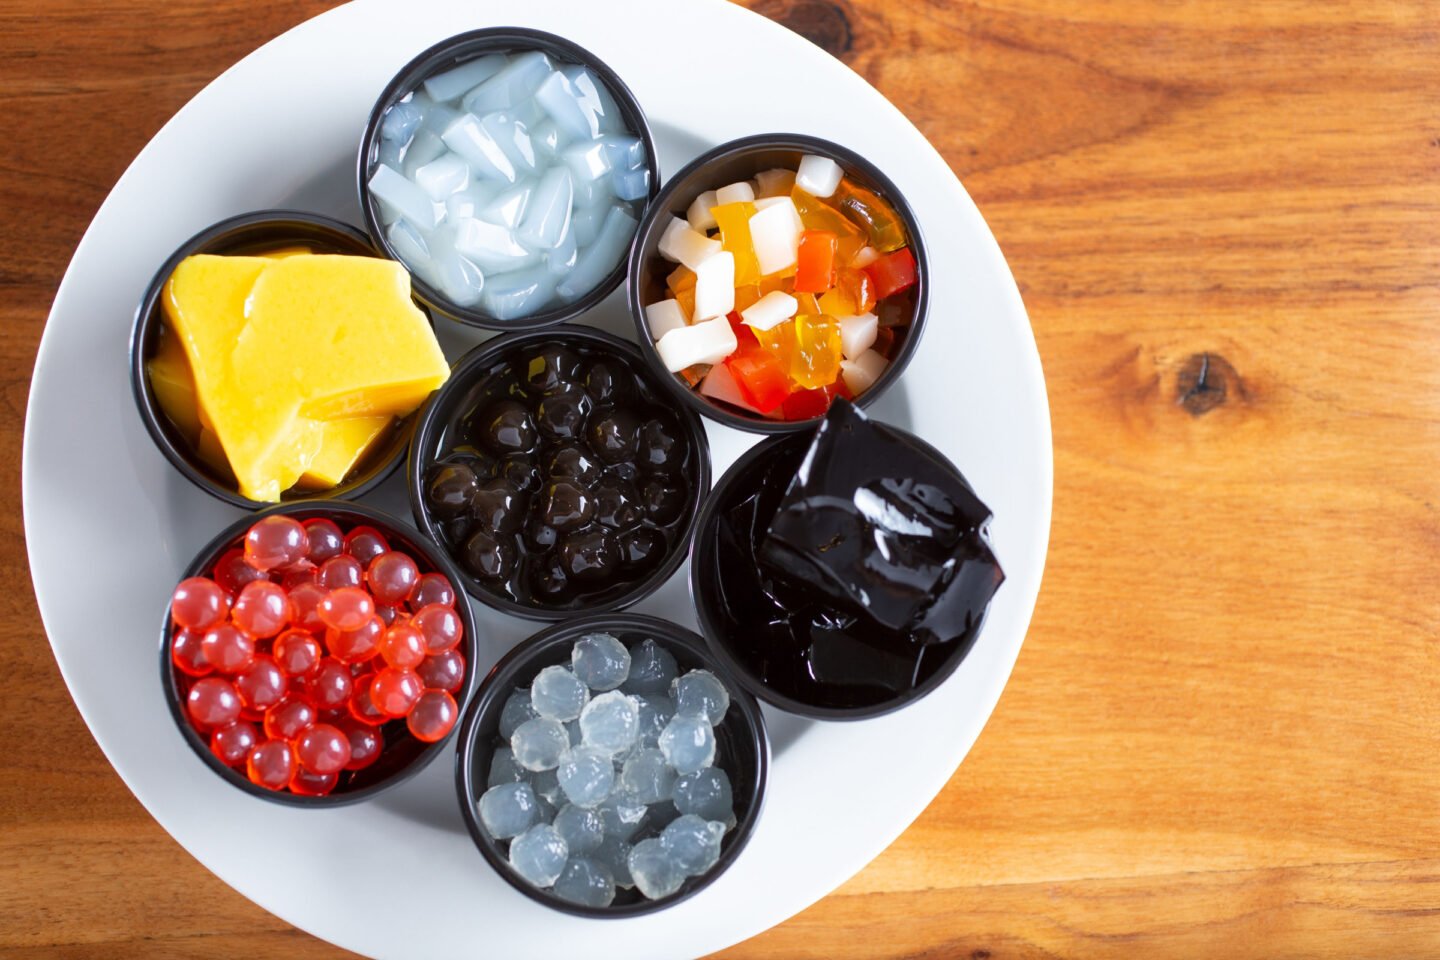 boba tea toppings and flavors